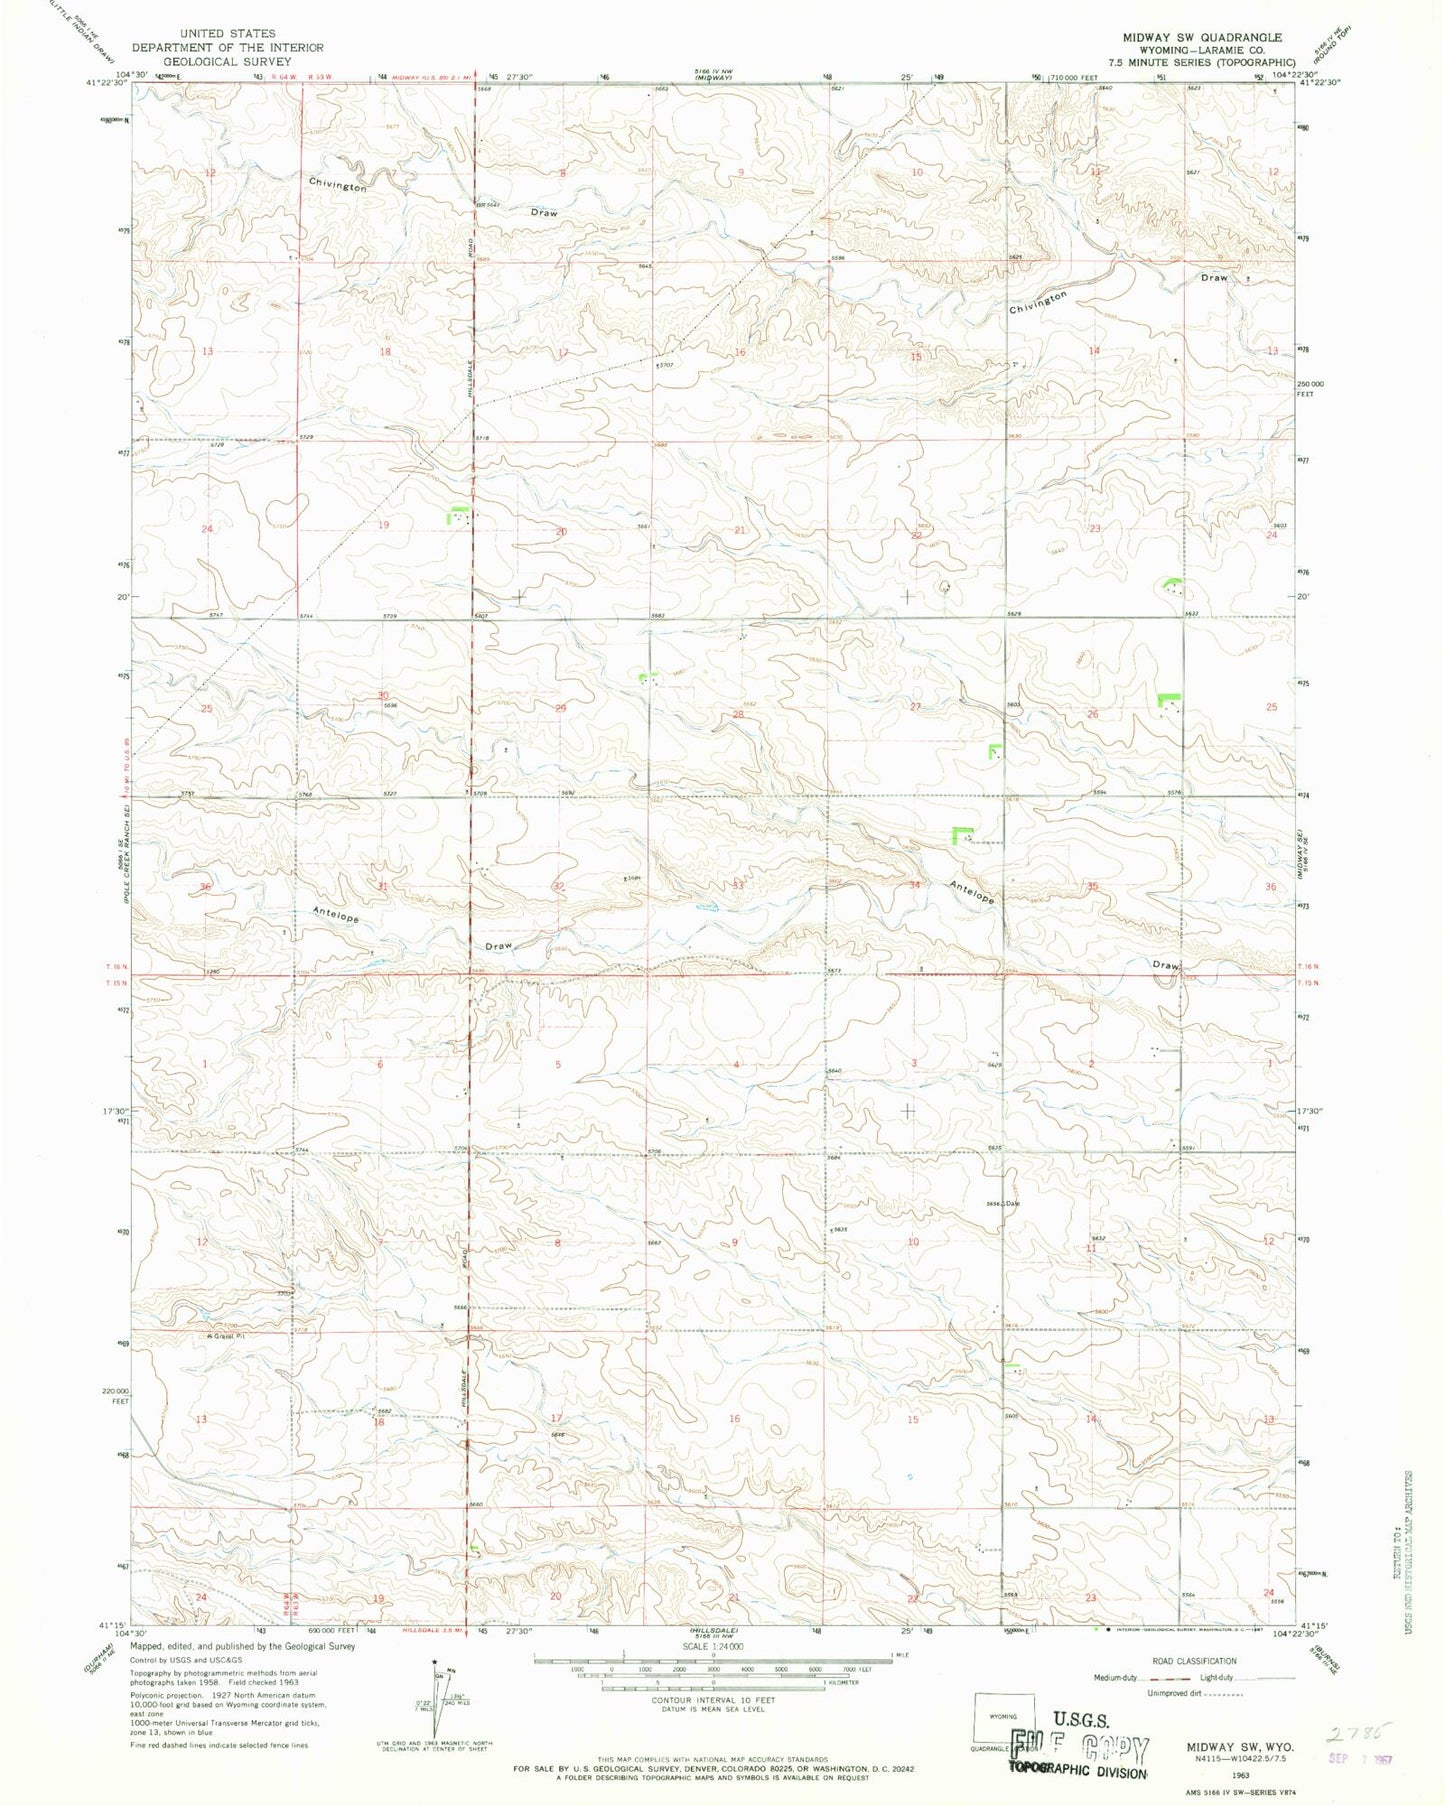 Classic USGS Midway SW Wyoming 7.5'x7.5' Topo Map Image